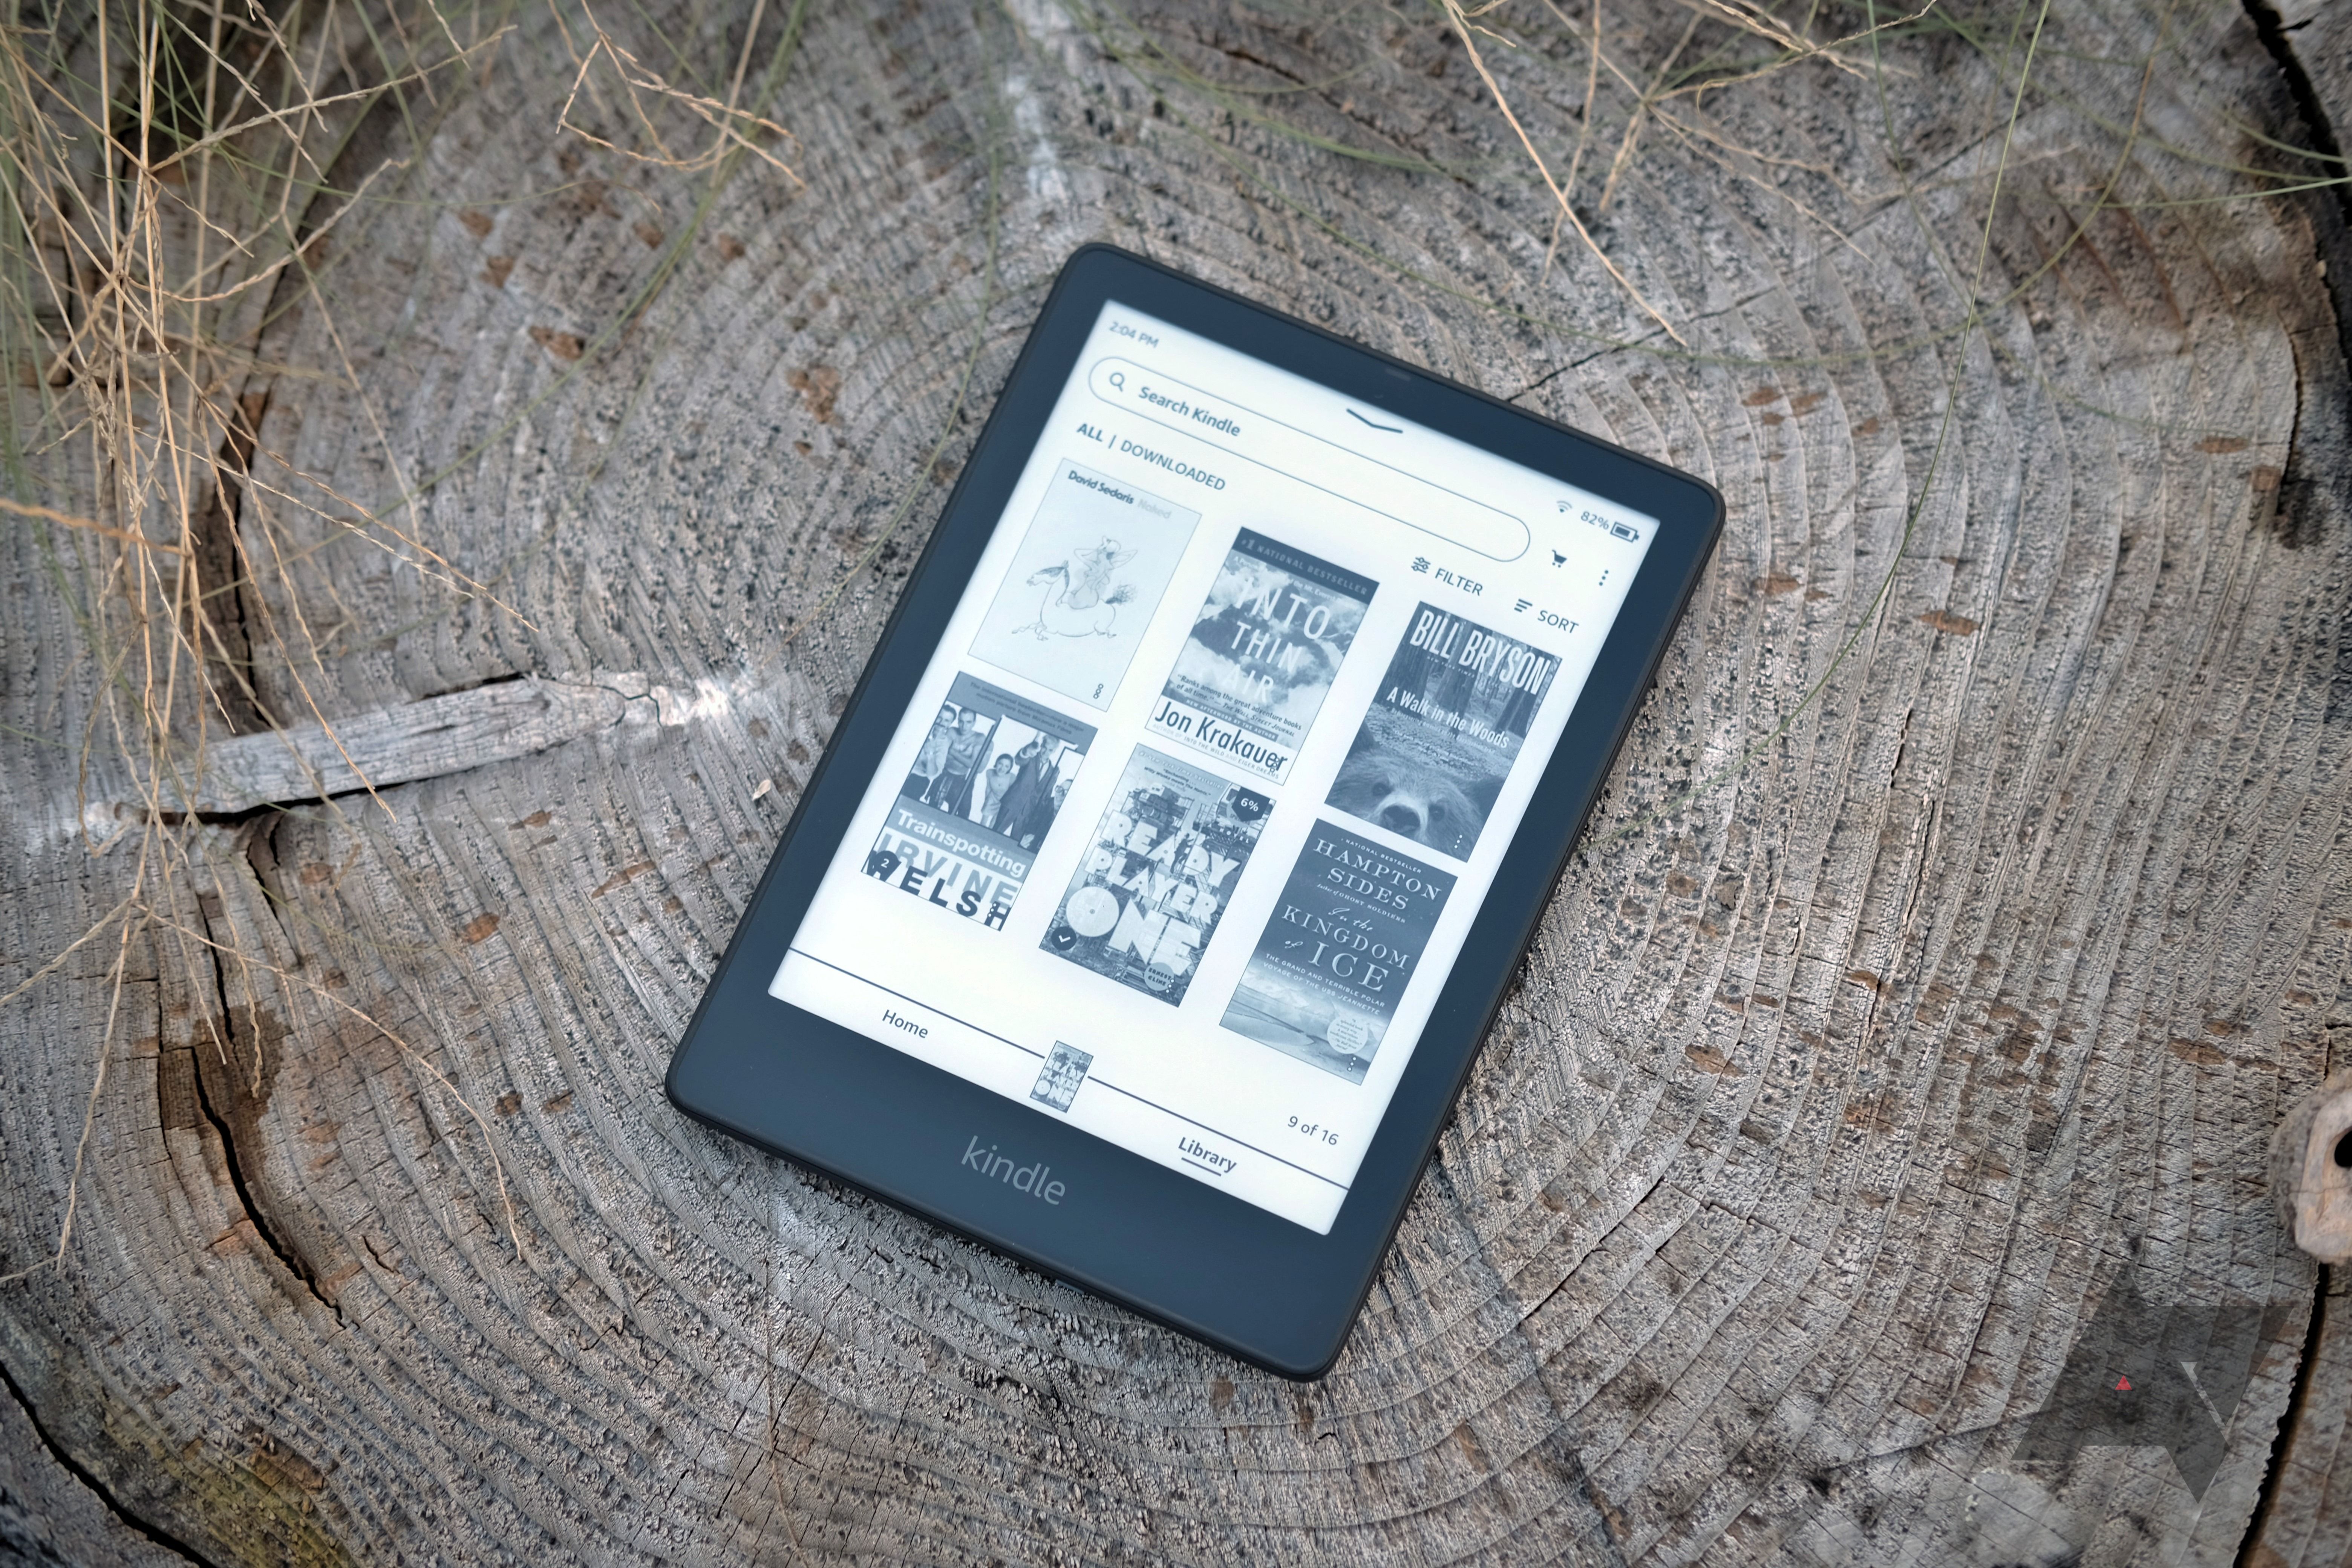 How to send documents and ebooks to your Kindle ereader